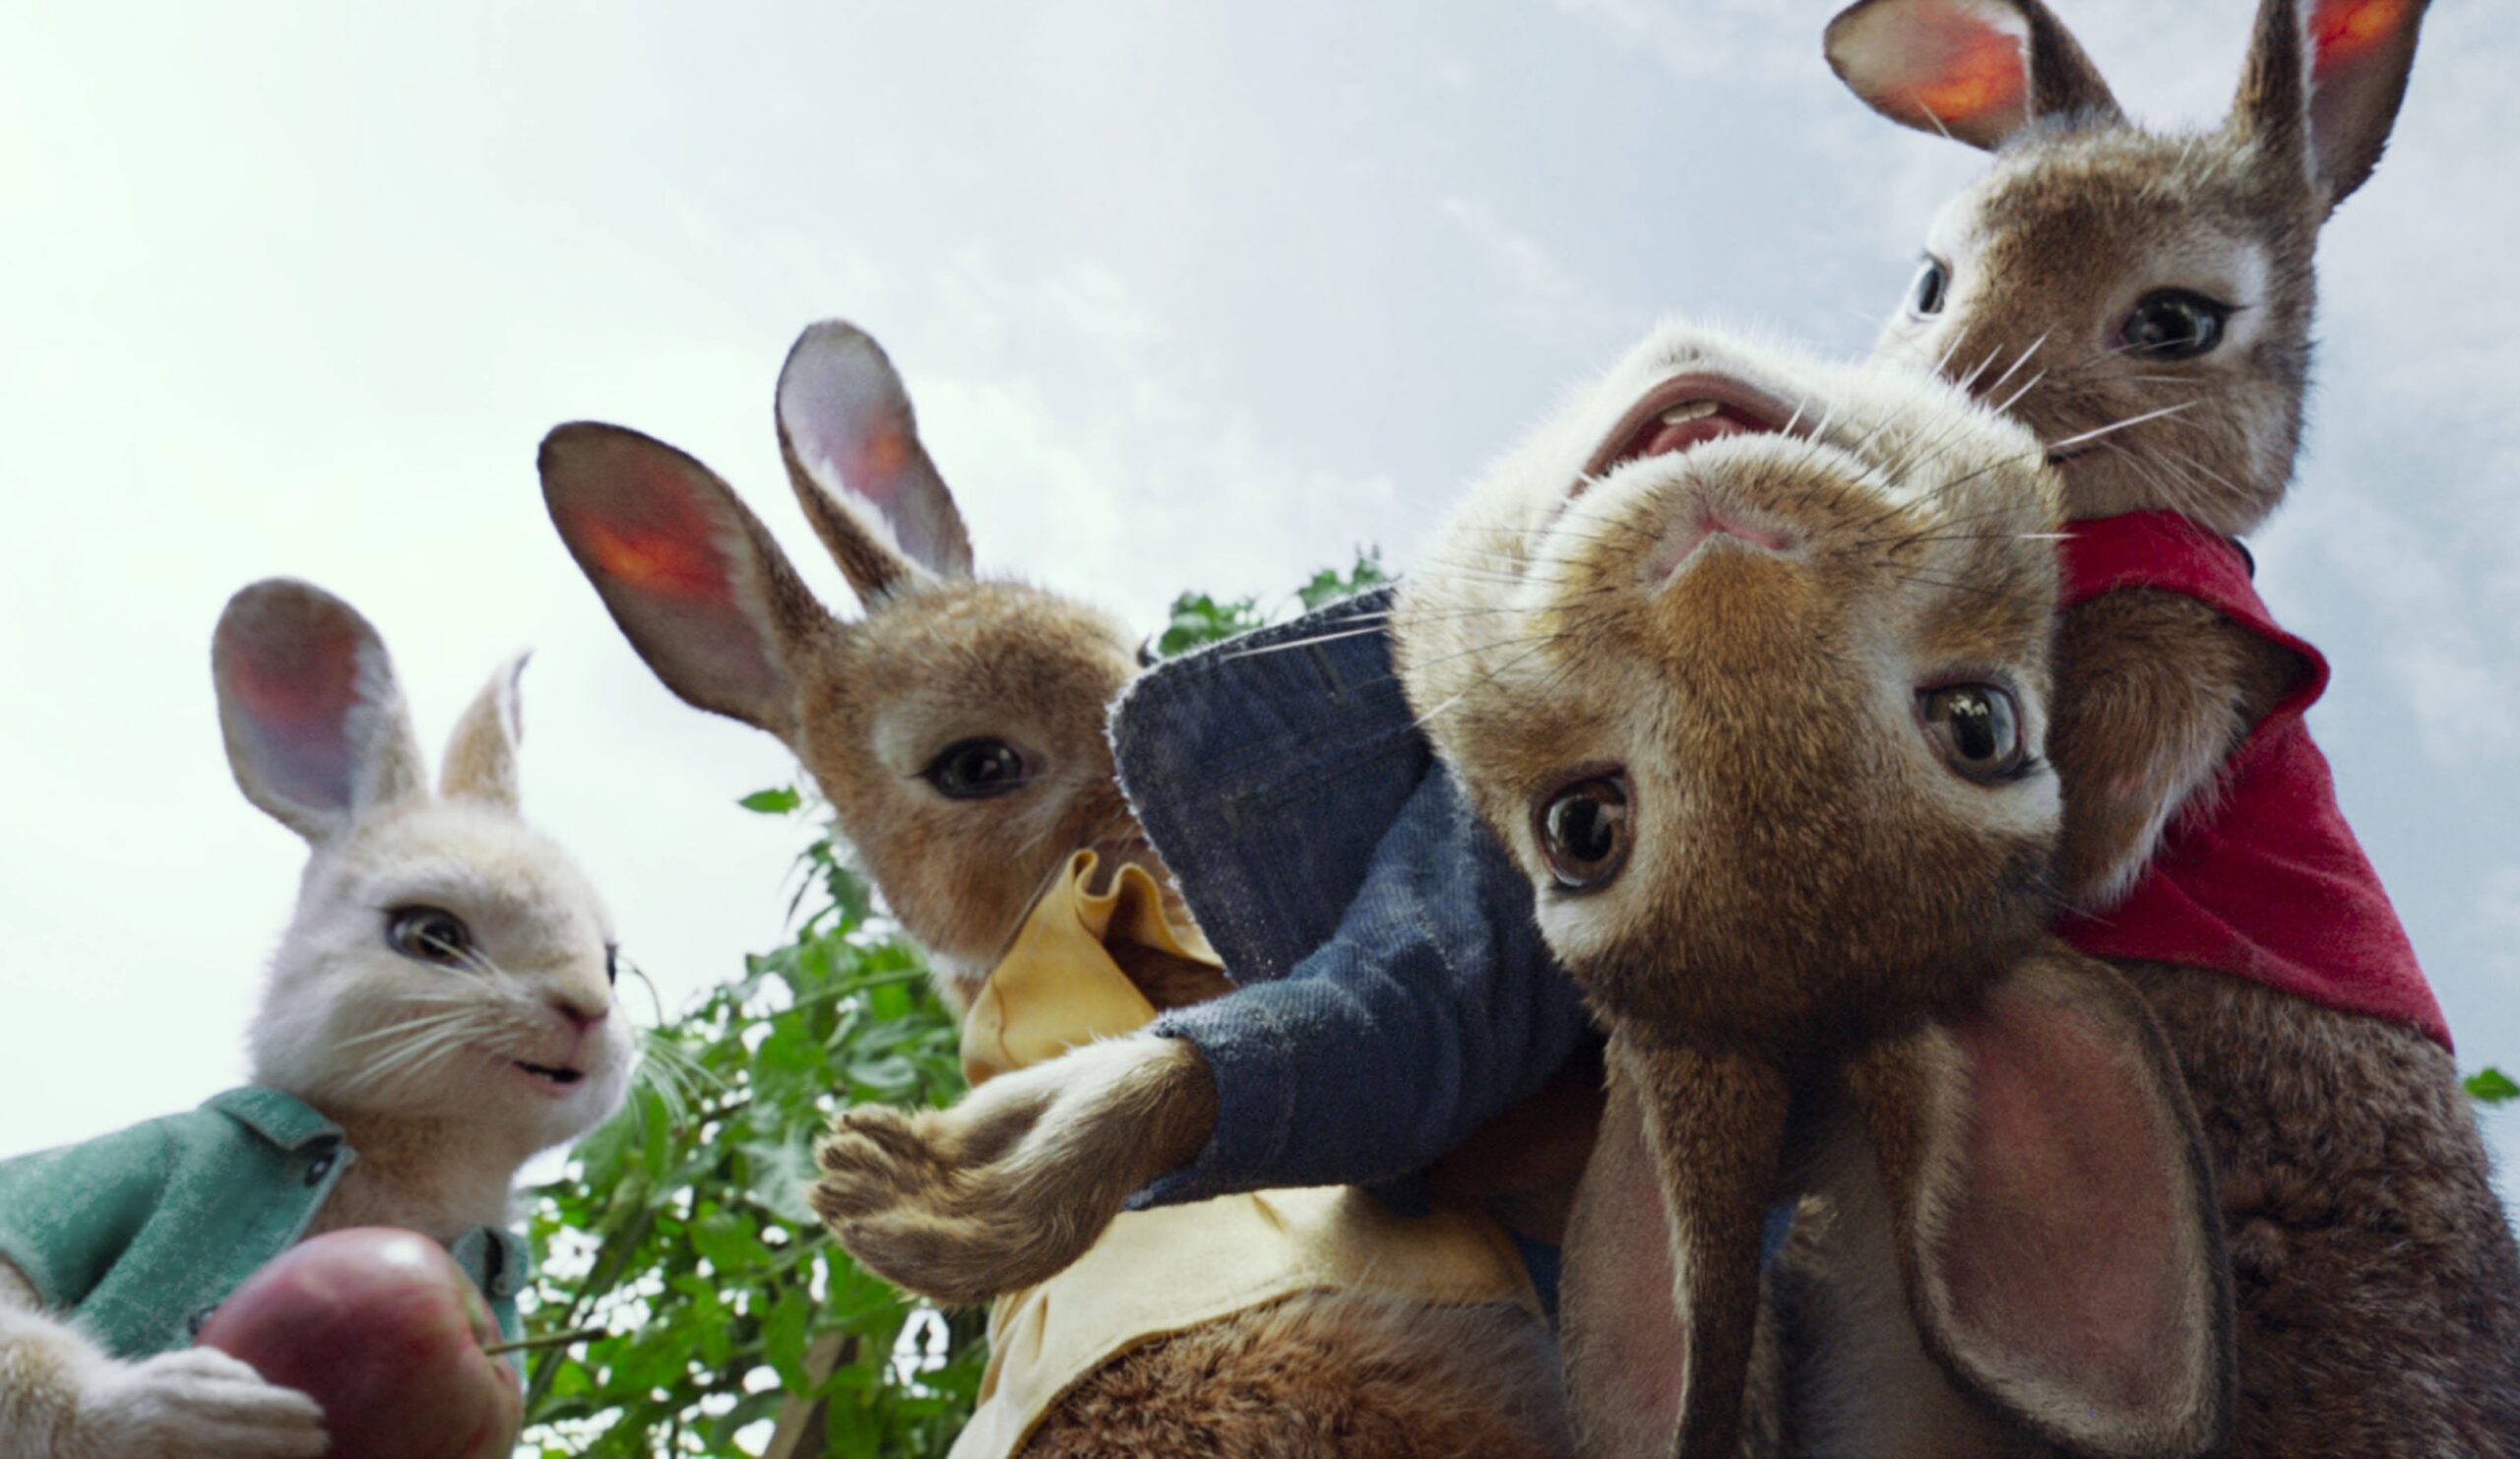 Here's Why Parents Are Furious at the New Peter Rabbit Movie